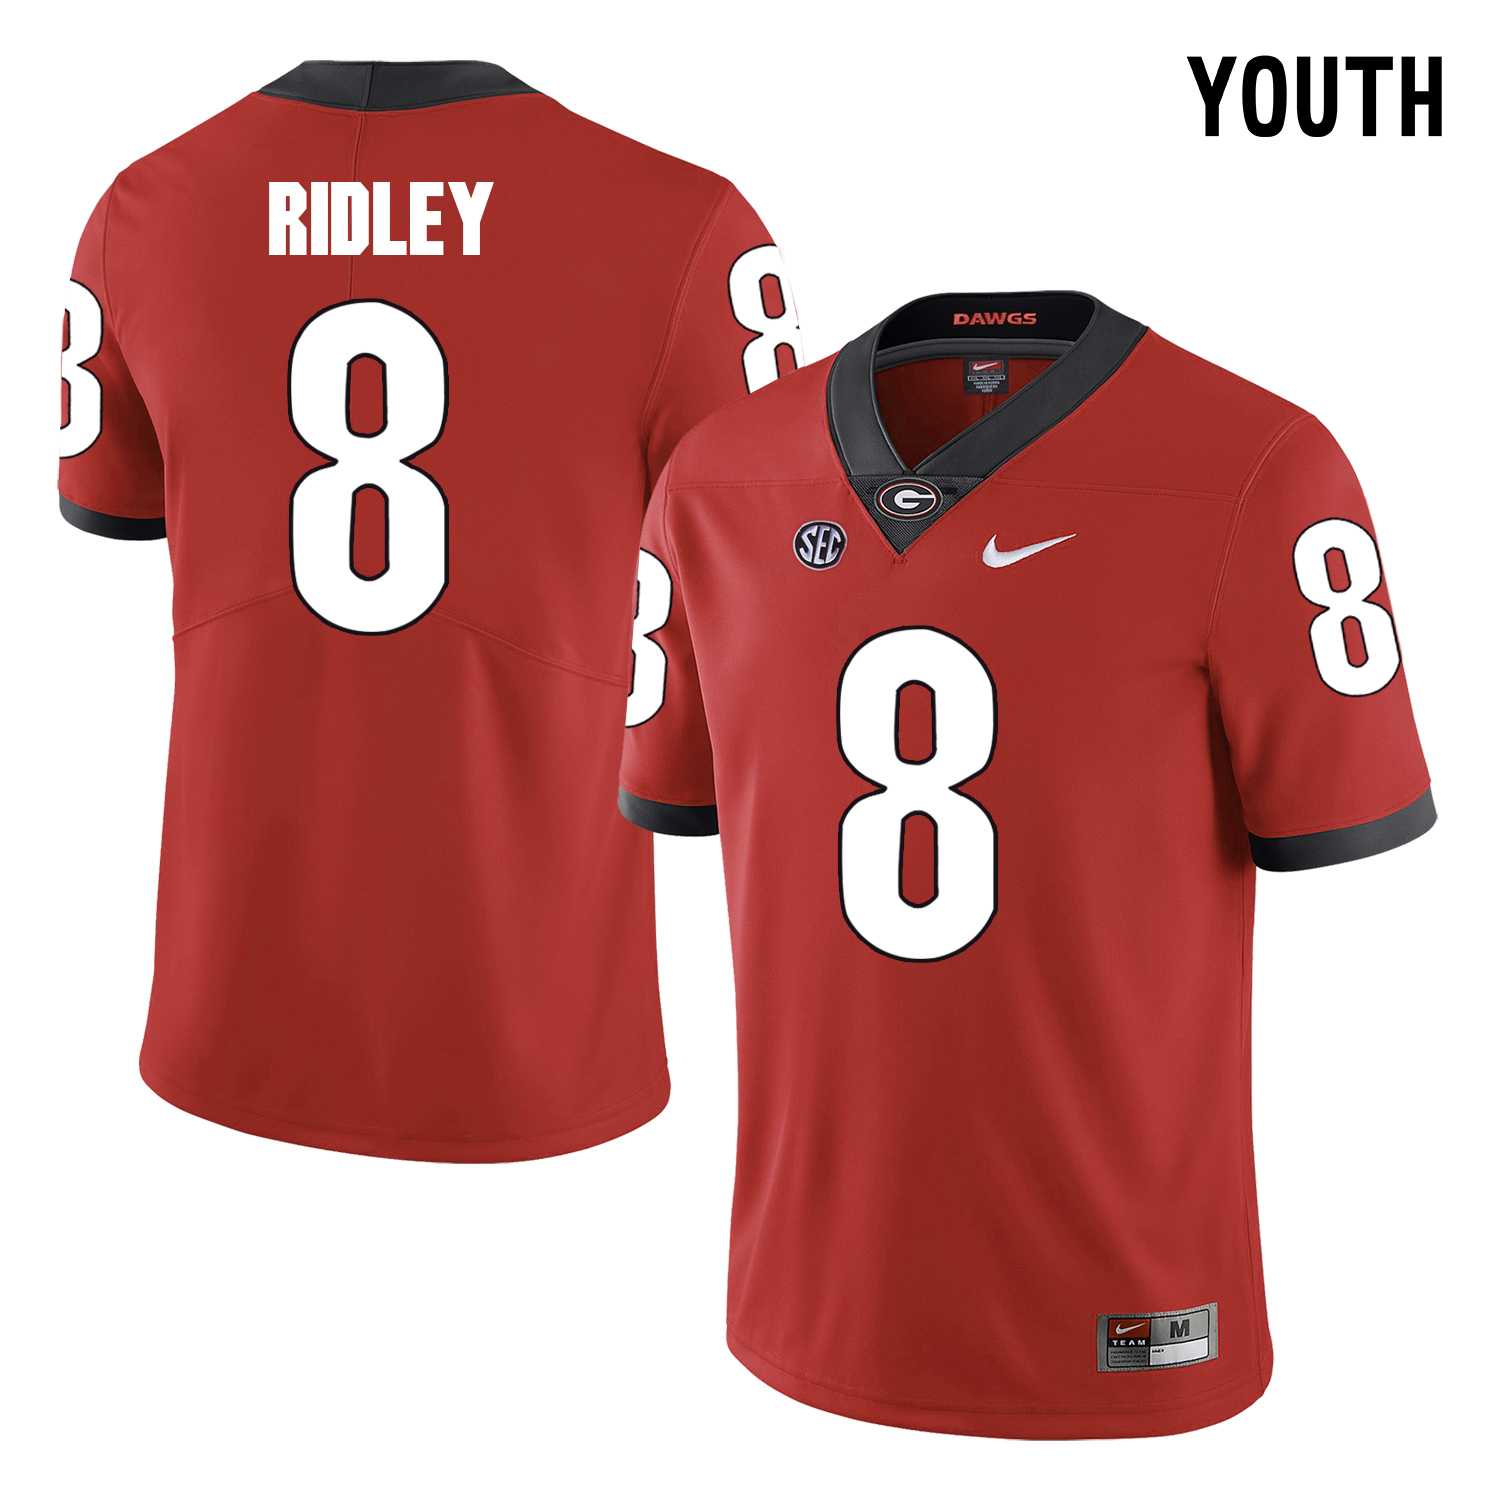 Georgia Bulldogs 8 Riley Ridley Red Youth College Football Jersey DingZhi